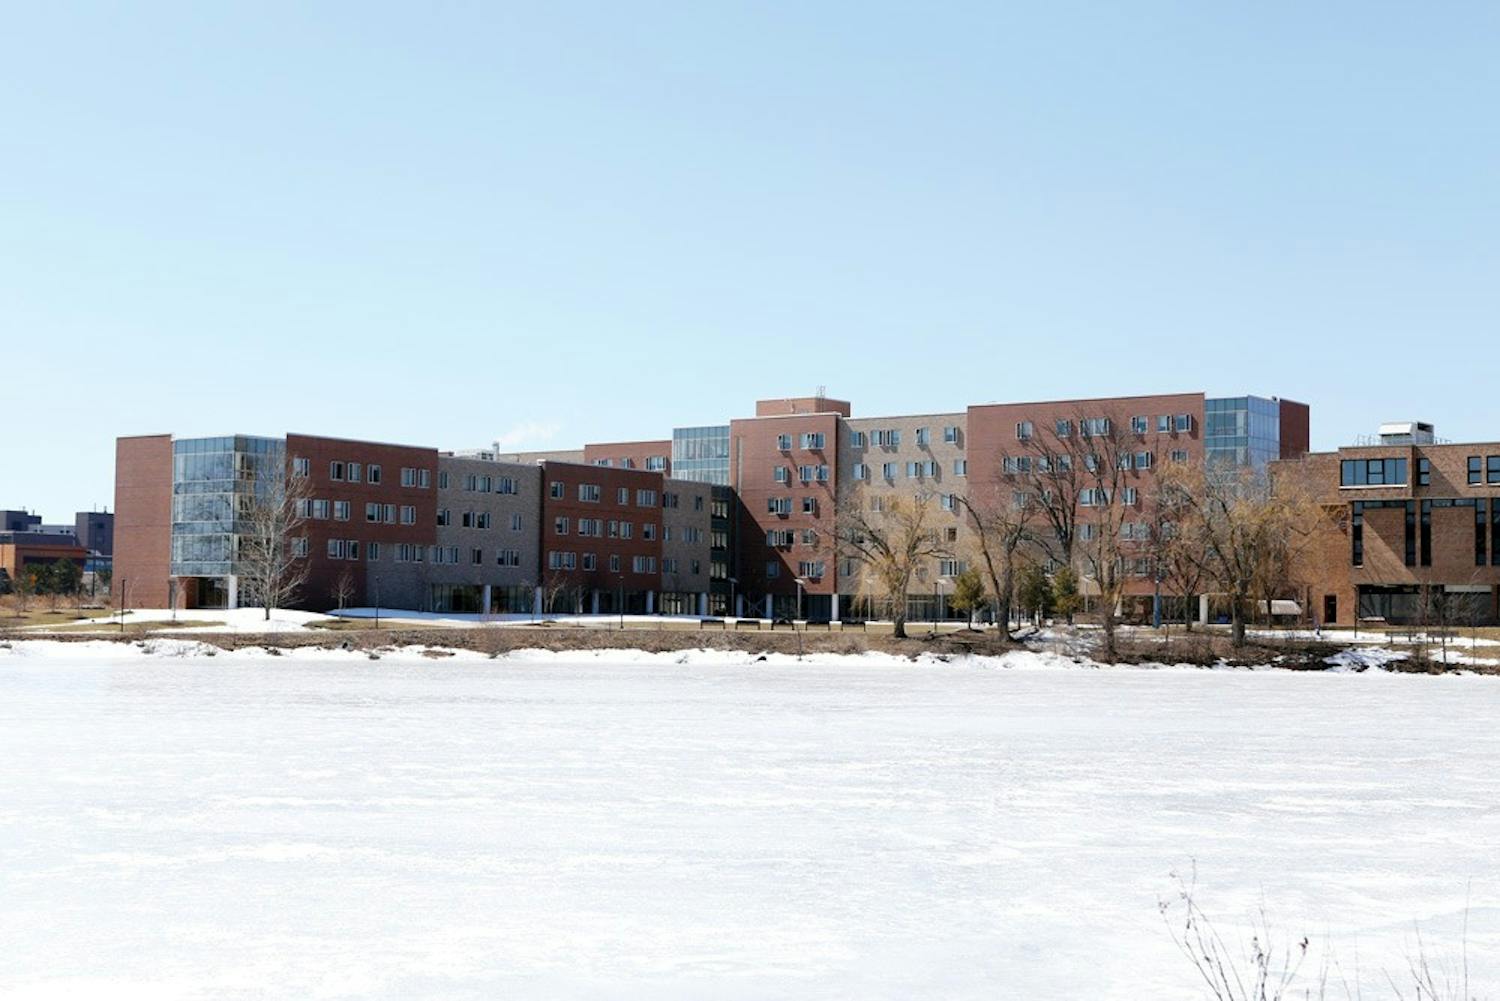 Over 7,000 students live in residence halls and campus apartments on North and South Campuses. To make housing selection simpler, UB housing has created a random lottery selection that not many students are pleased with. Greiner Hall on North Campus is one of the dorms preferred by UB students.